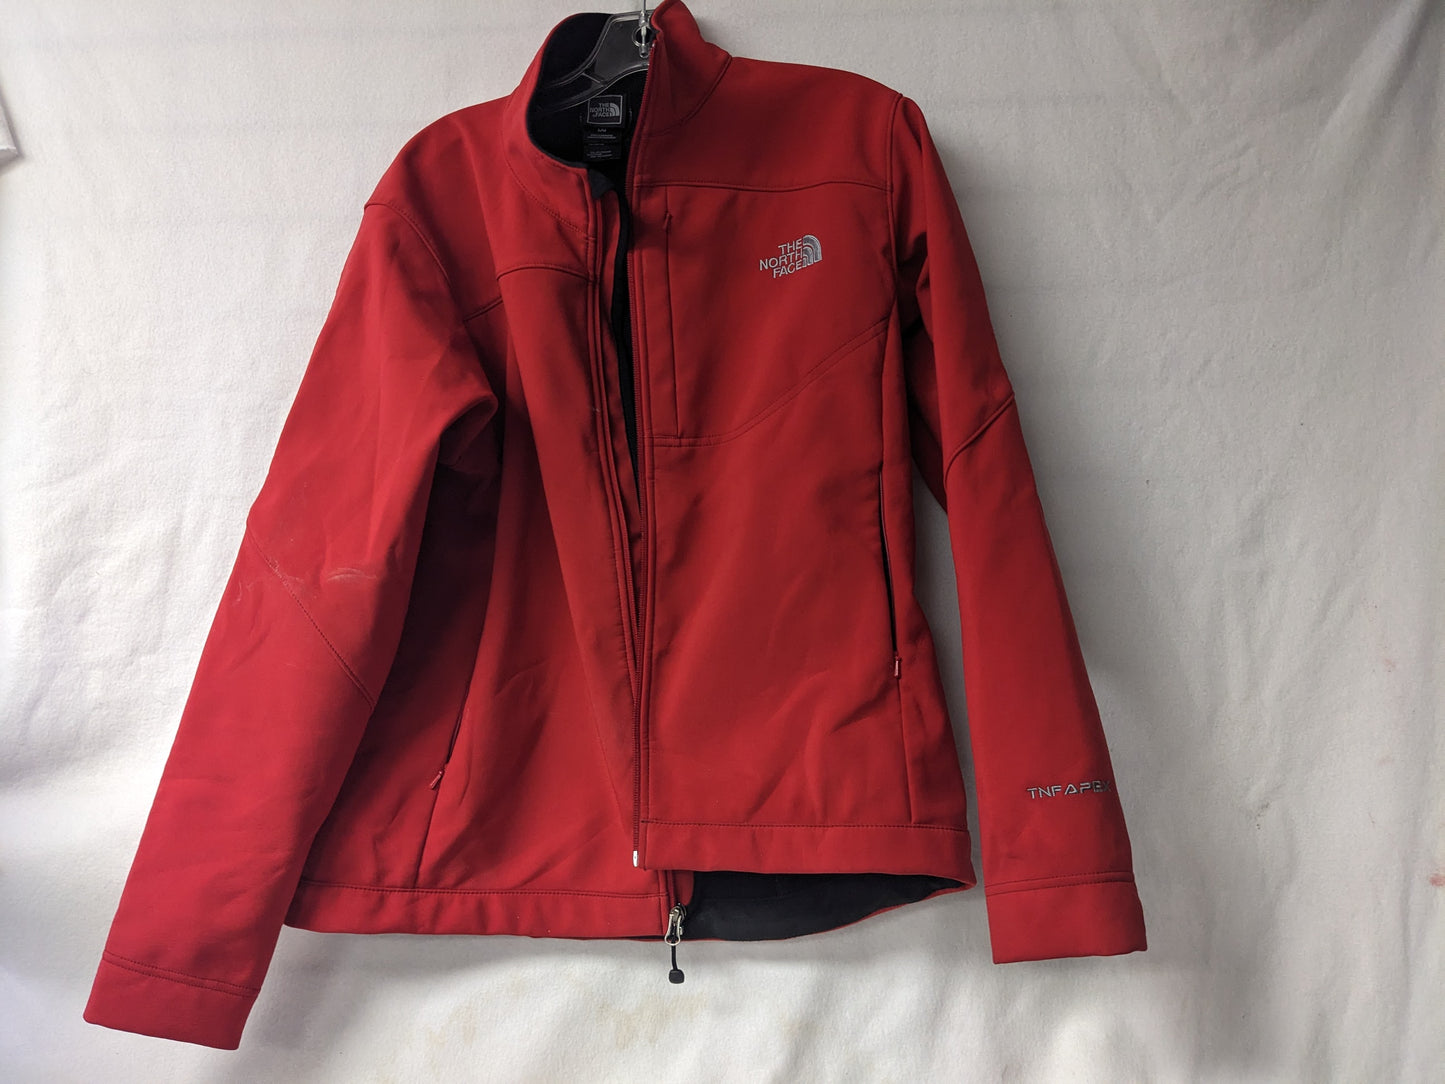 The North Face TNF Apex Women's Jacket/Coat Size Women Large Color Red Condition Use